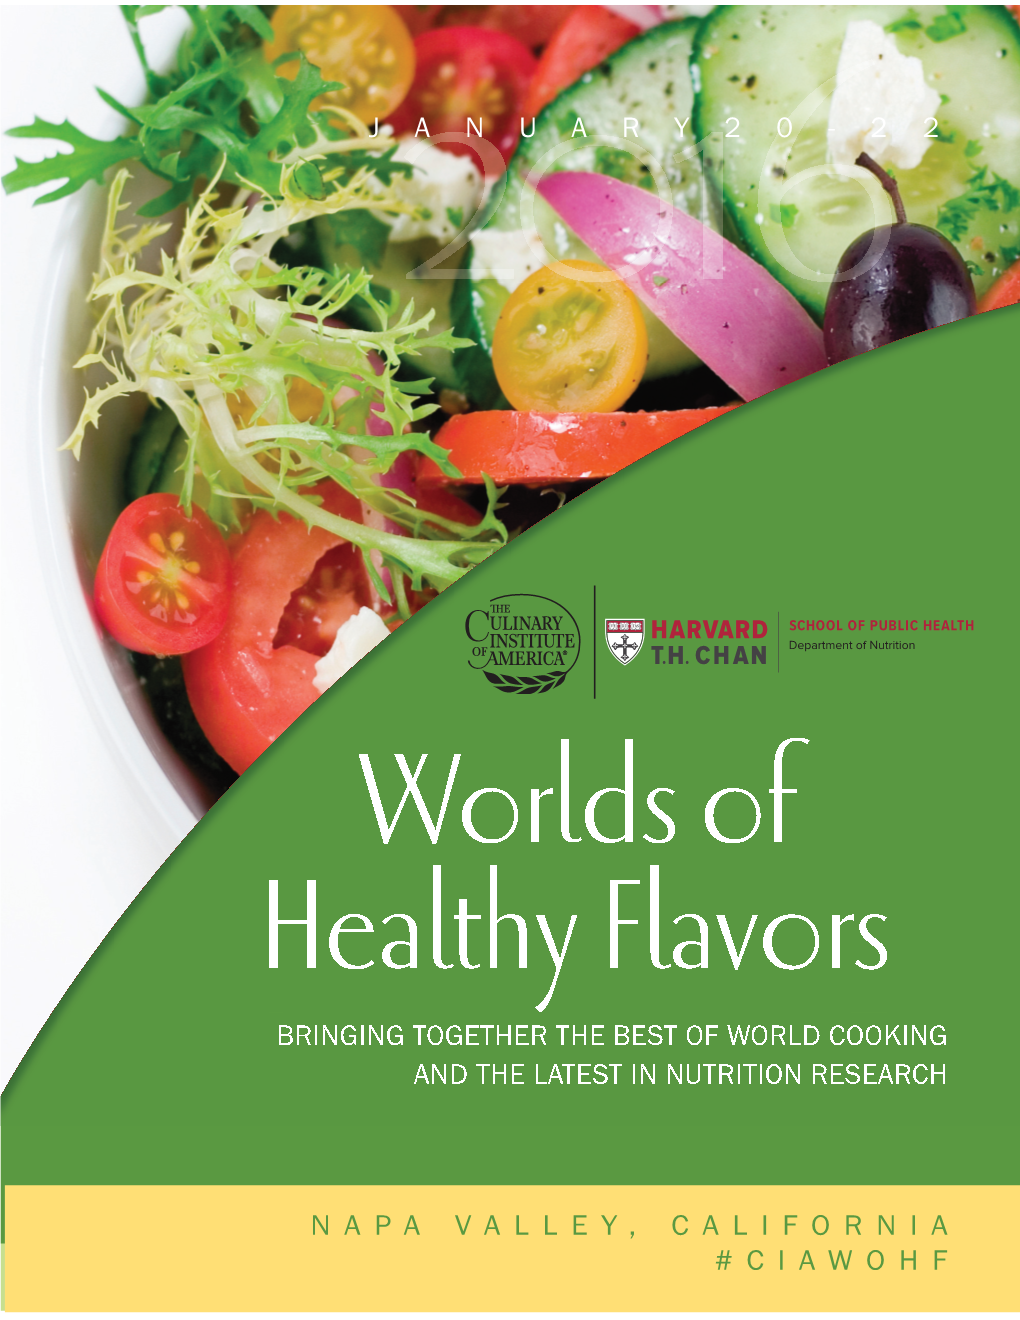 Worlds of Healthy Flavors BRINGING TOGETHER the BEST of WORLD COOKING and the LATEST in NUTRITION RESEARCH